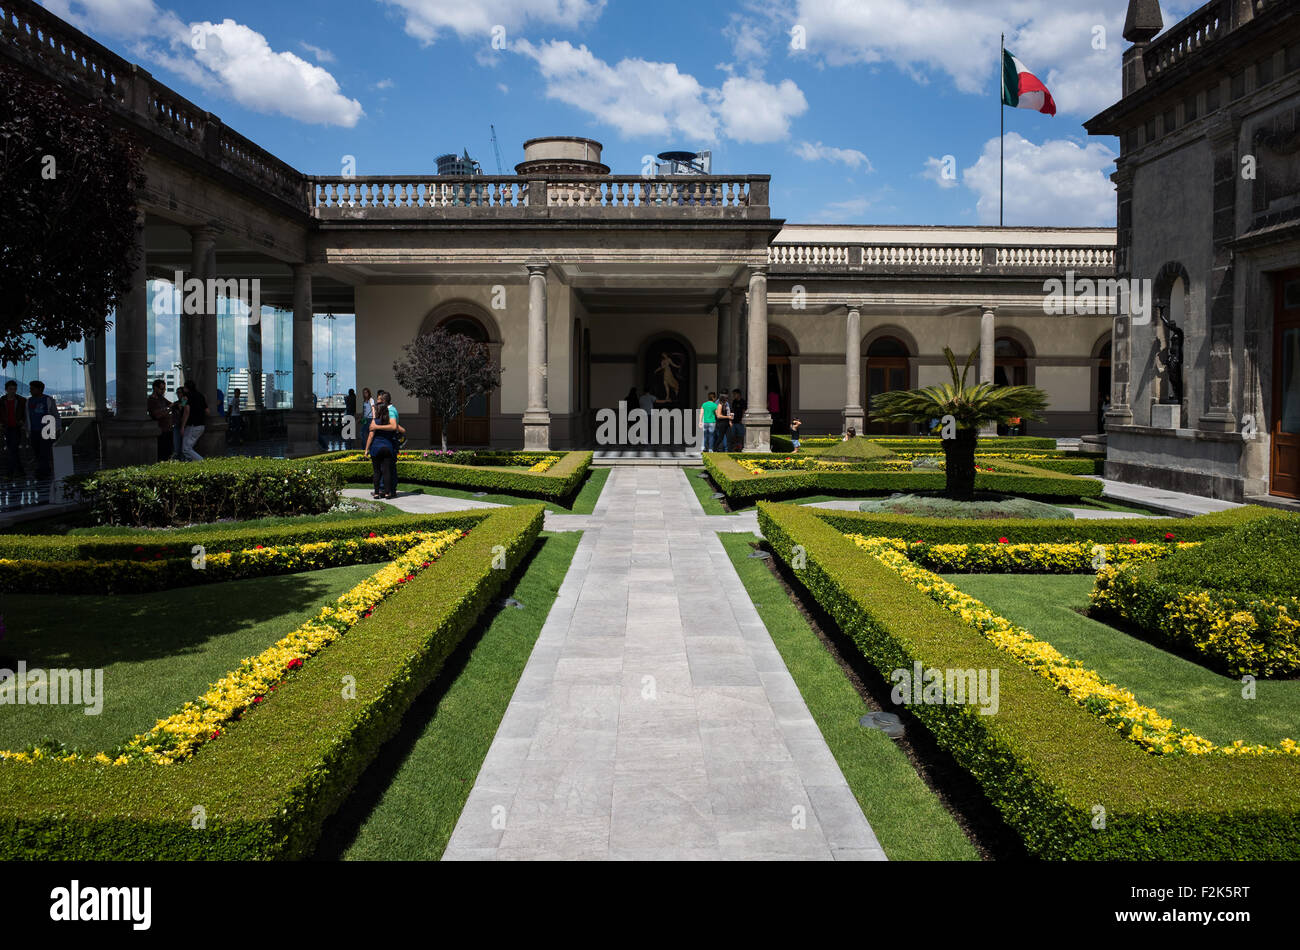 MEXICO City, Mexico - Gardens at Chapultepec Castle. Since construction first started around 1785, Chapultepec Castle has been a Military Academy, Imperial residence, Presidential home, observatory, and is now Mexico's National History Museum (Museo Nacional de Historia). It sits on top of Chapultepec Hill in the heart of Mexico City. Stock Photo